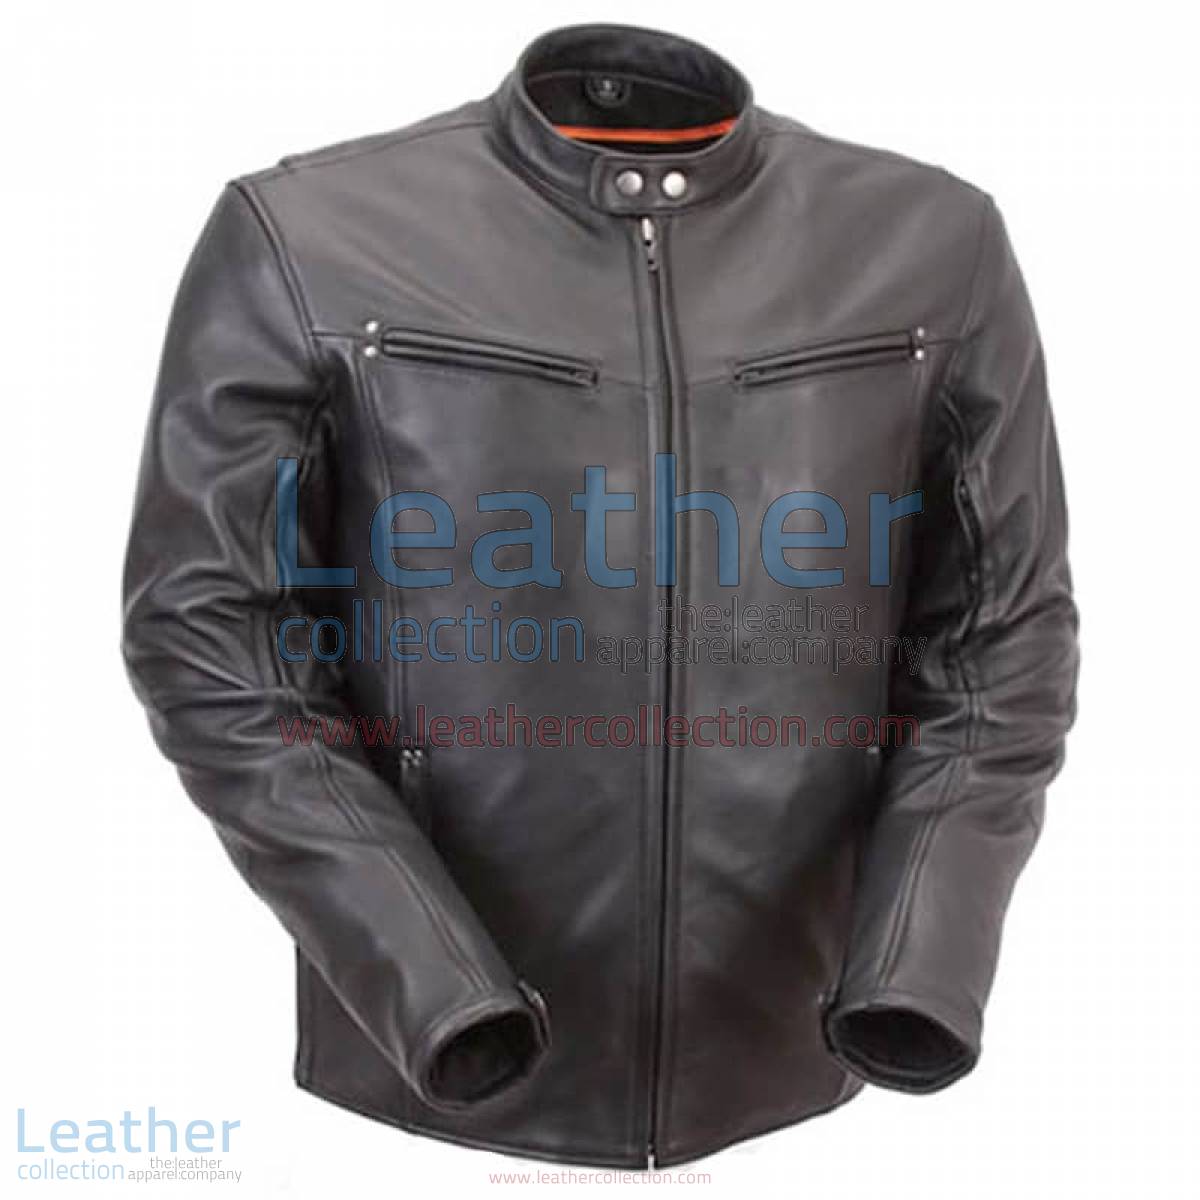 Premium Leather Rider Jacket with Multiple Vents | premium leather jacket